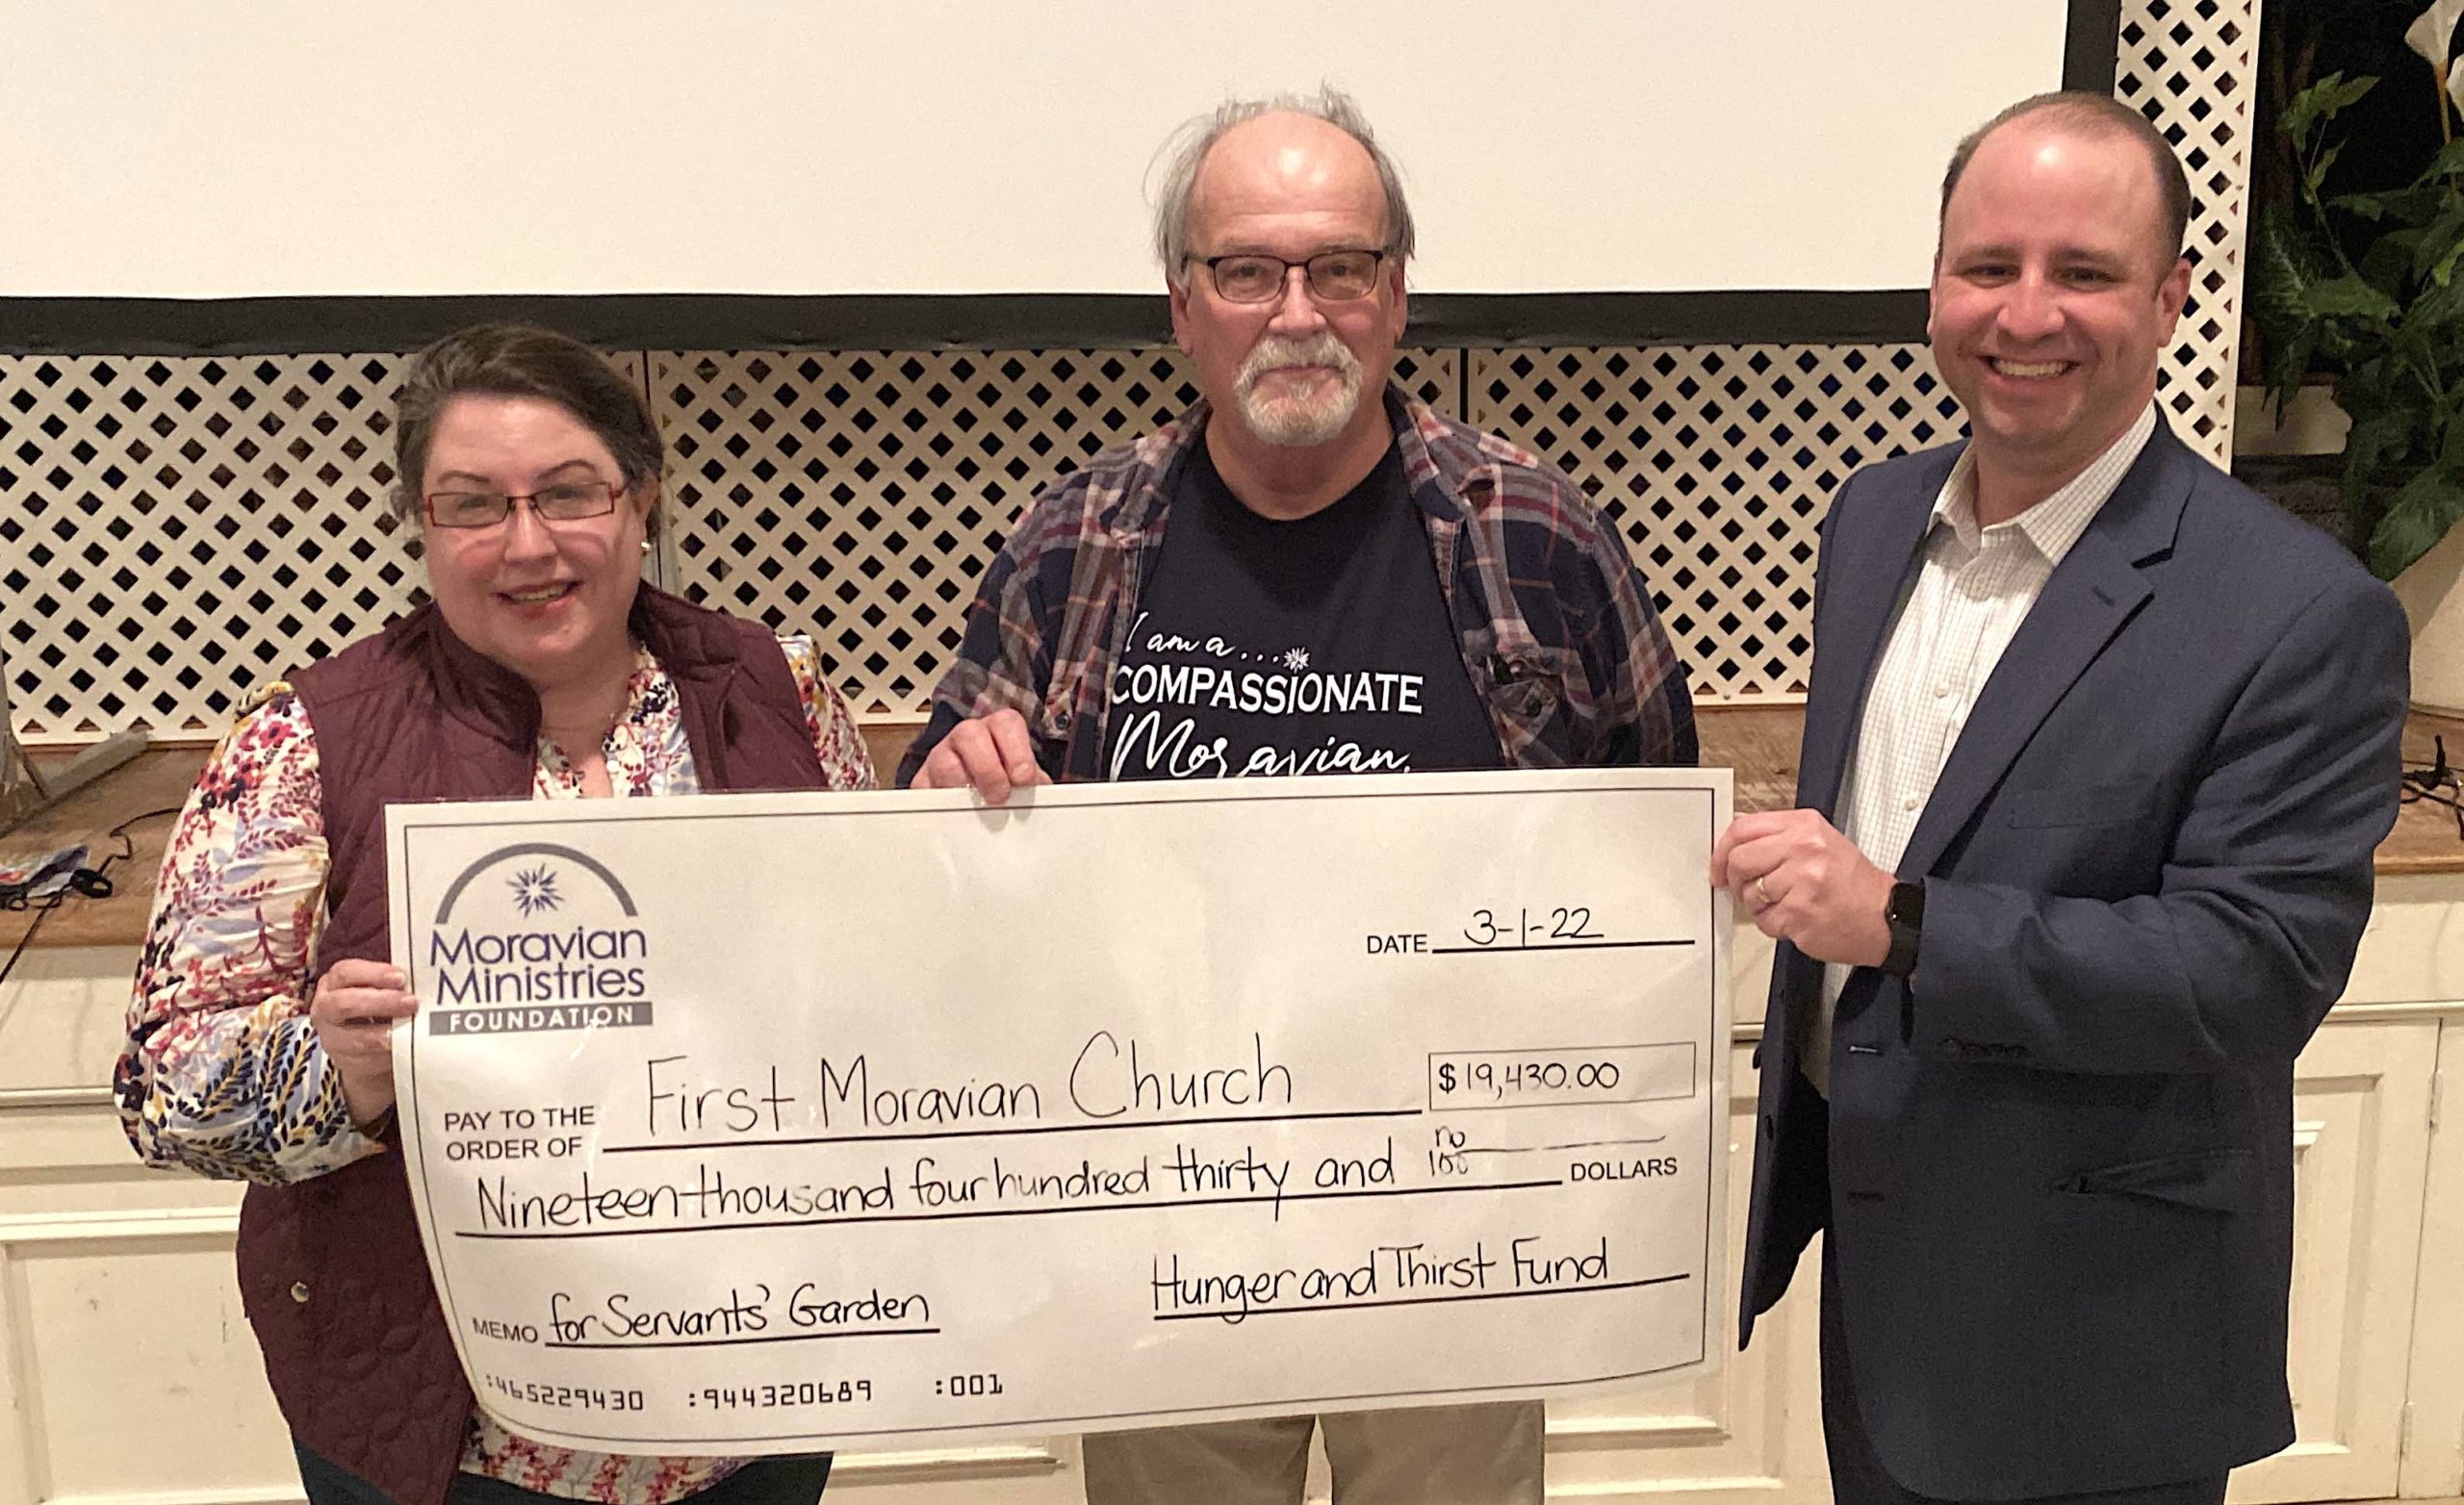 MMFA President/CEO Chris Spaugh (R) presents grant funds from the Hunger & Thirst Field of Interest Funds to Meredith Cohoon and Samuel Post, Jr. of First Moravian Church in Greensboro, NC.